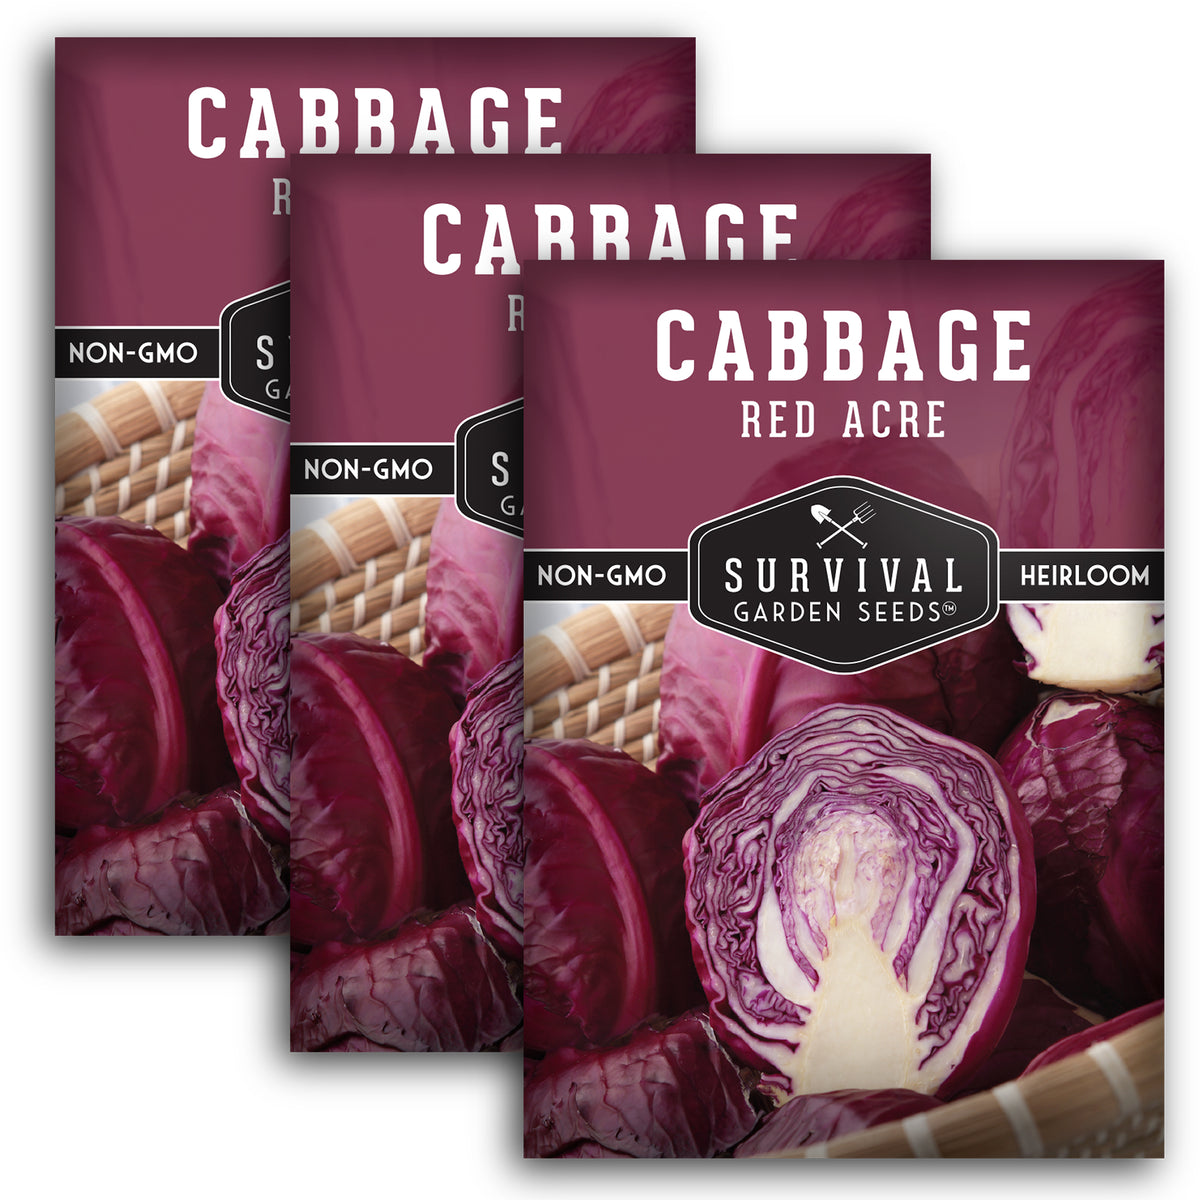 3 packets of Red Acre Cabbage Seeds